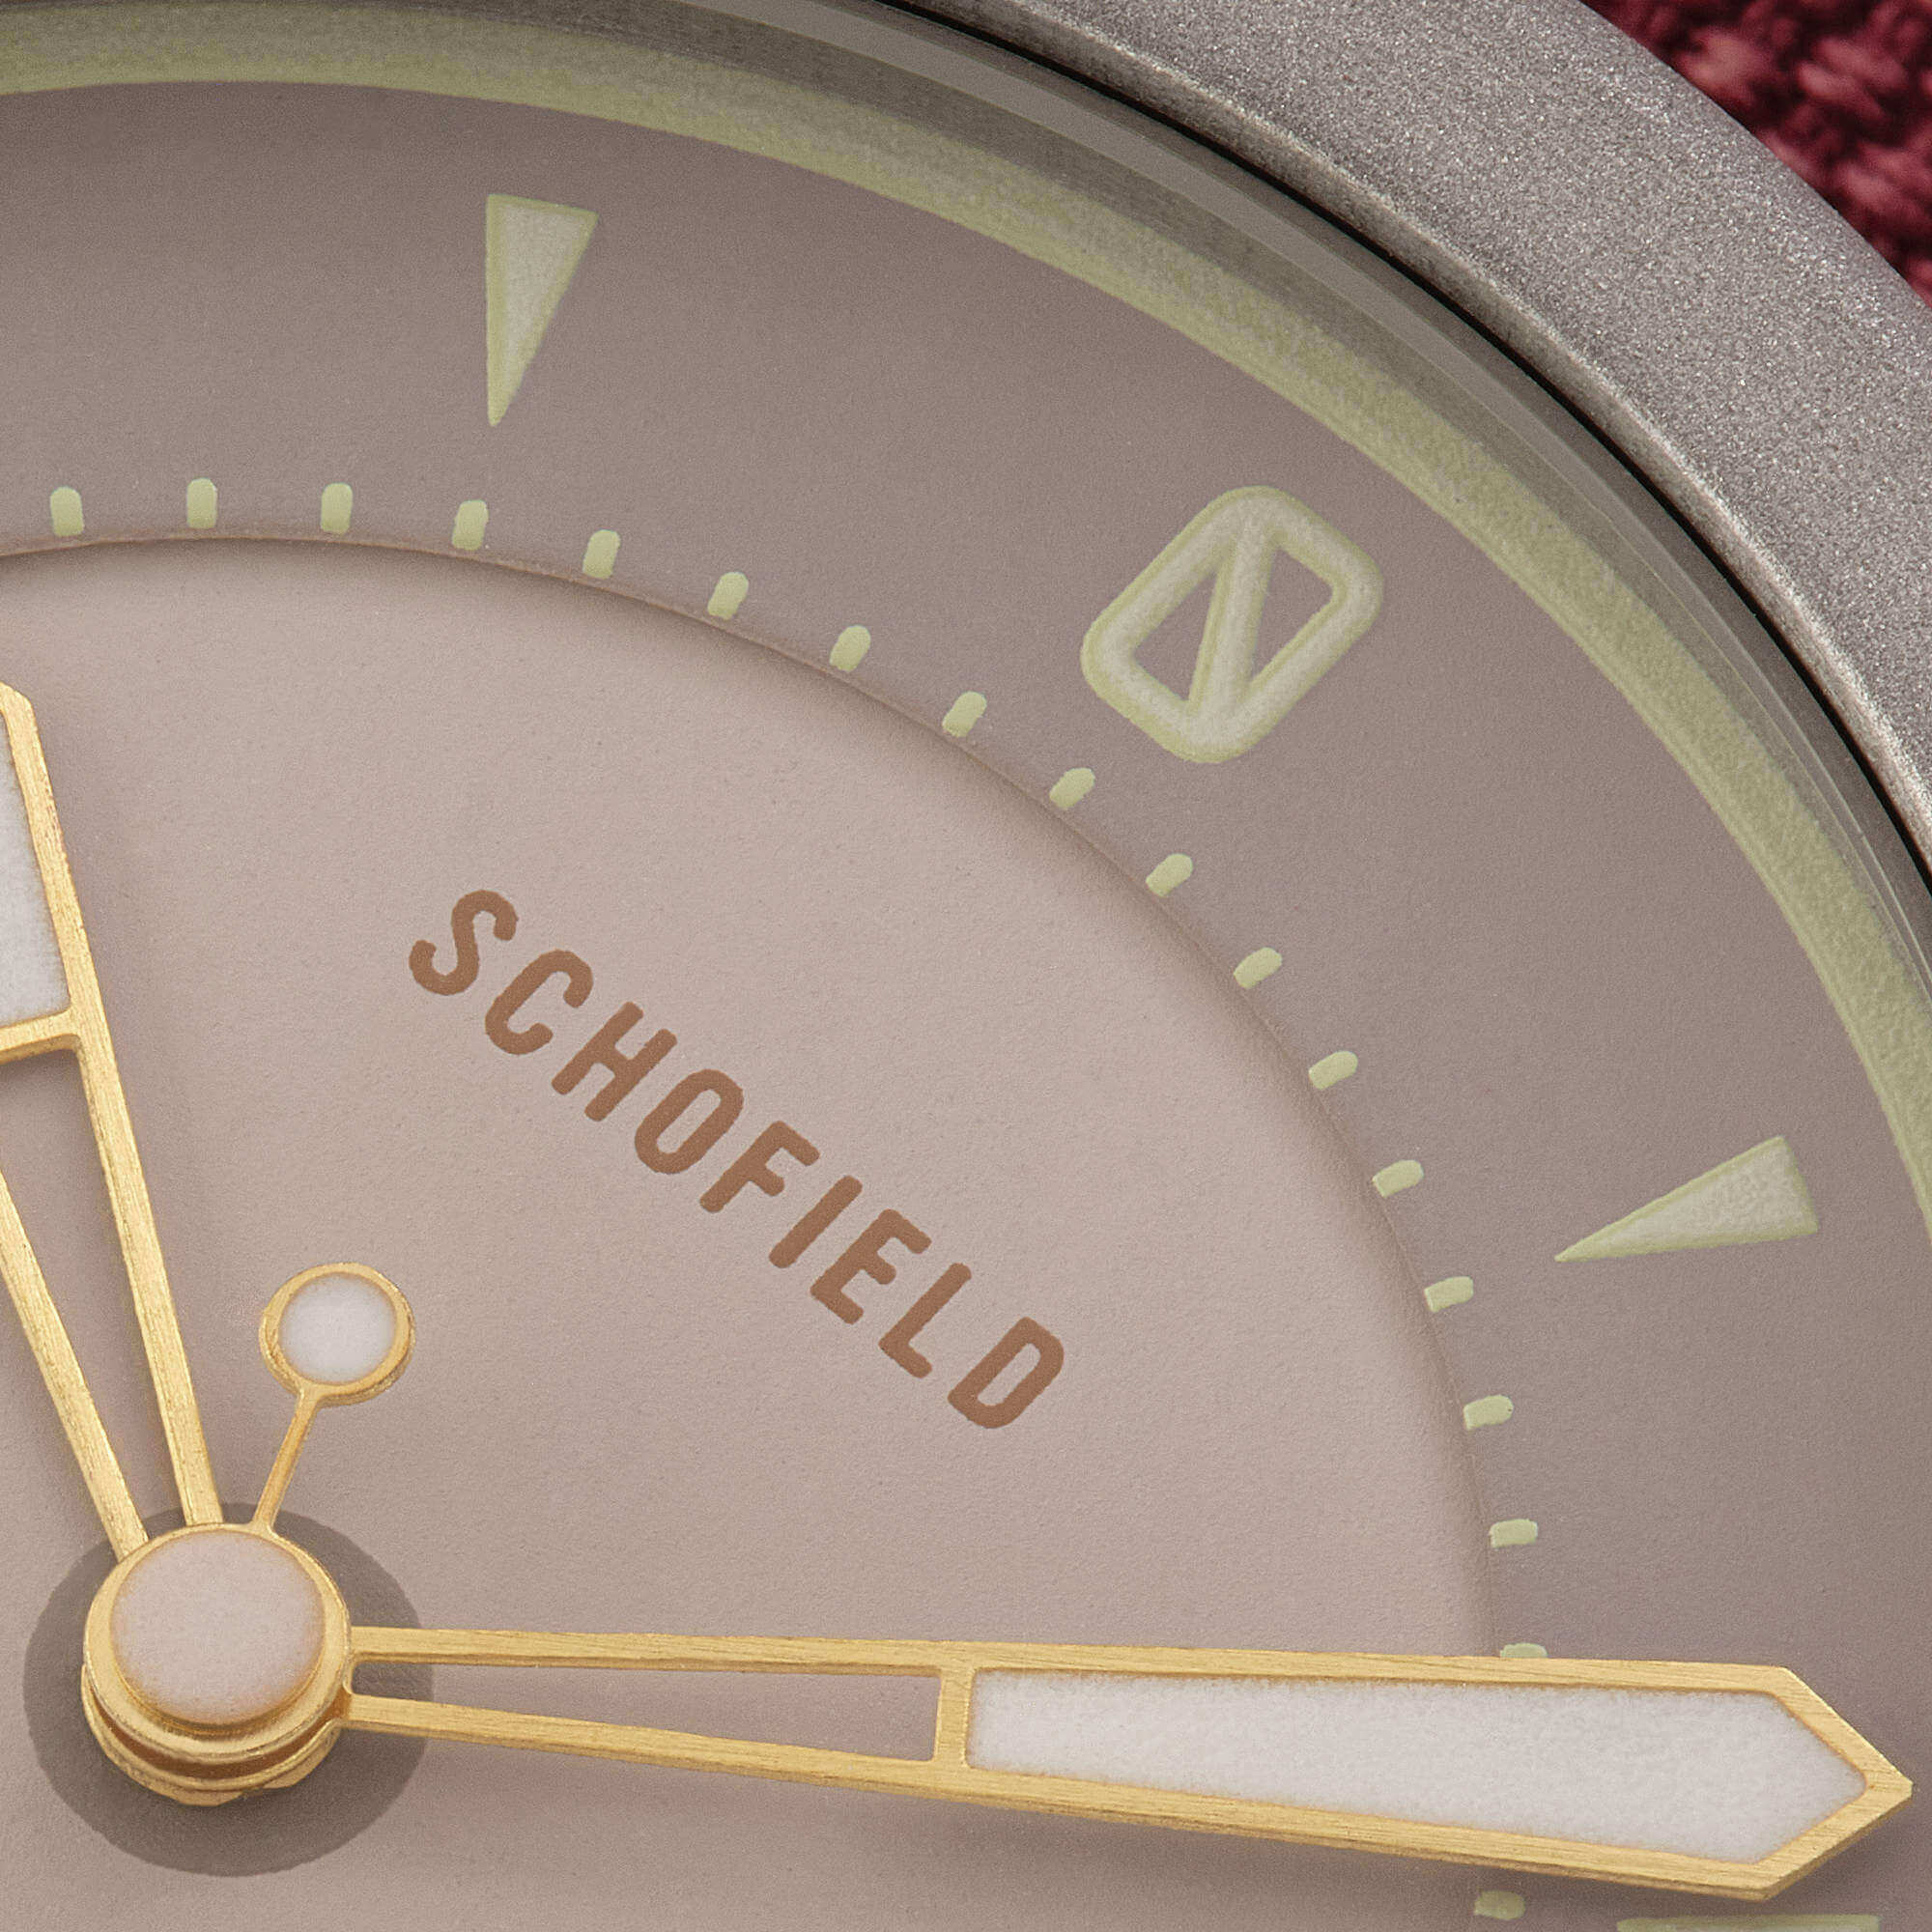 Schofield Japanese Beater dial